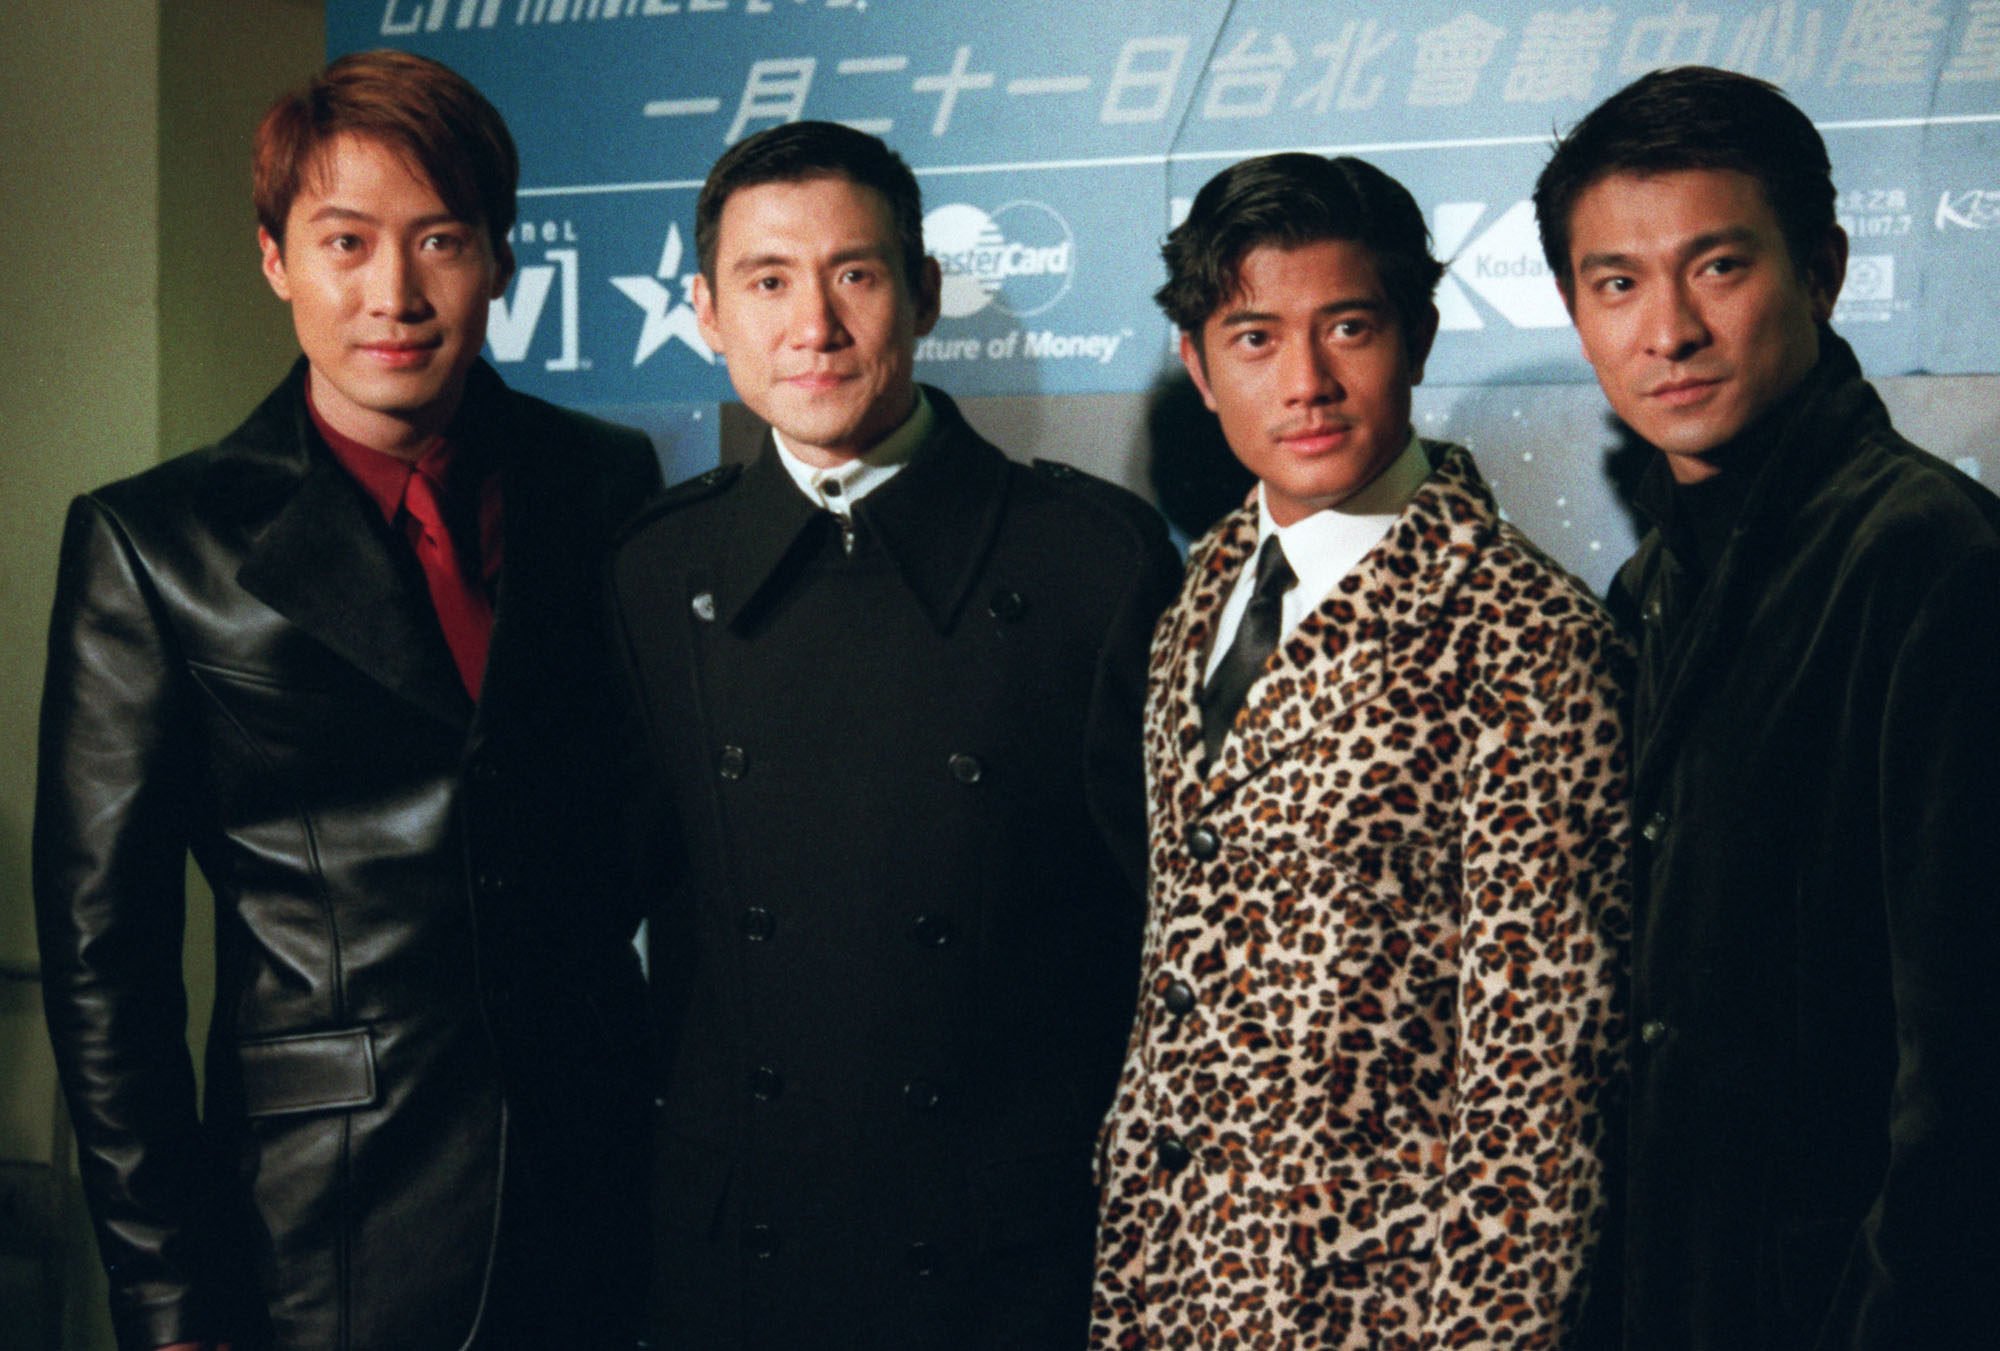 Canto-pop’s Four Heavenly Kings in their prime: Leon Lai, Jacky Cheung, Aaron Kwok and Andy Lau at Channel V Chinese Top 20 Awards in Taipei, before the genre plunged into its “hopeless” decades, losing relevance.